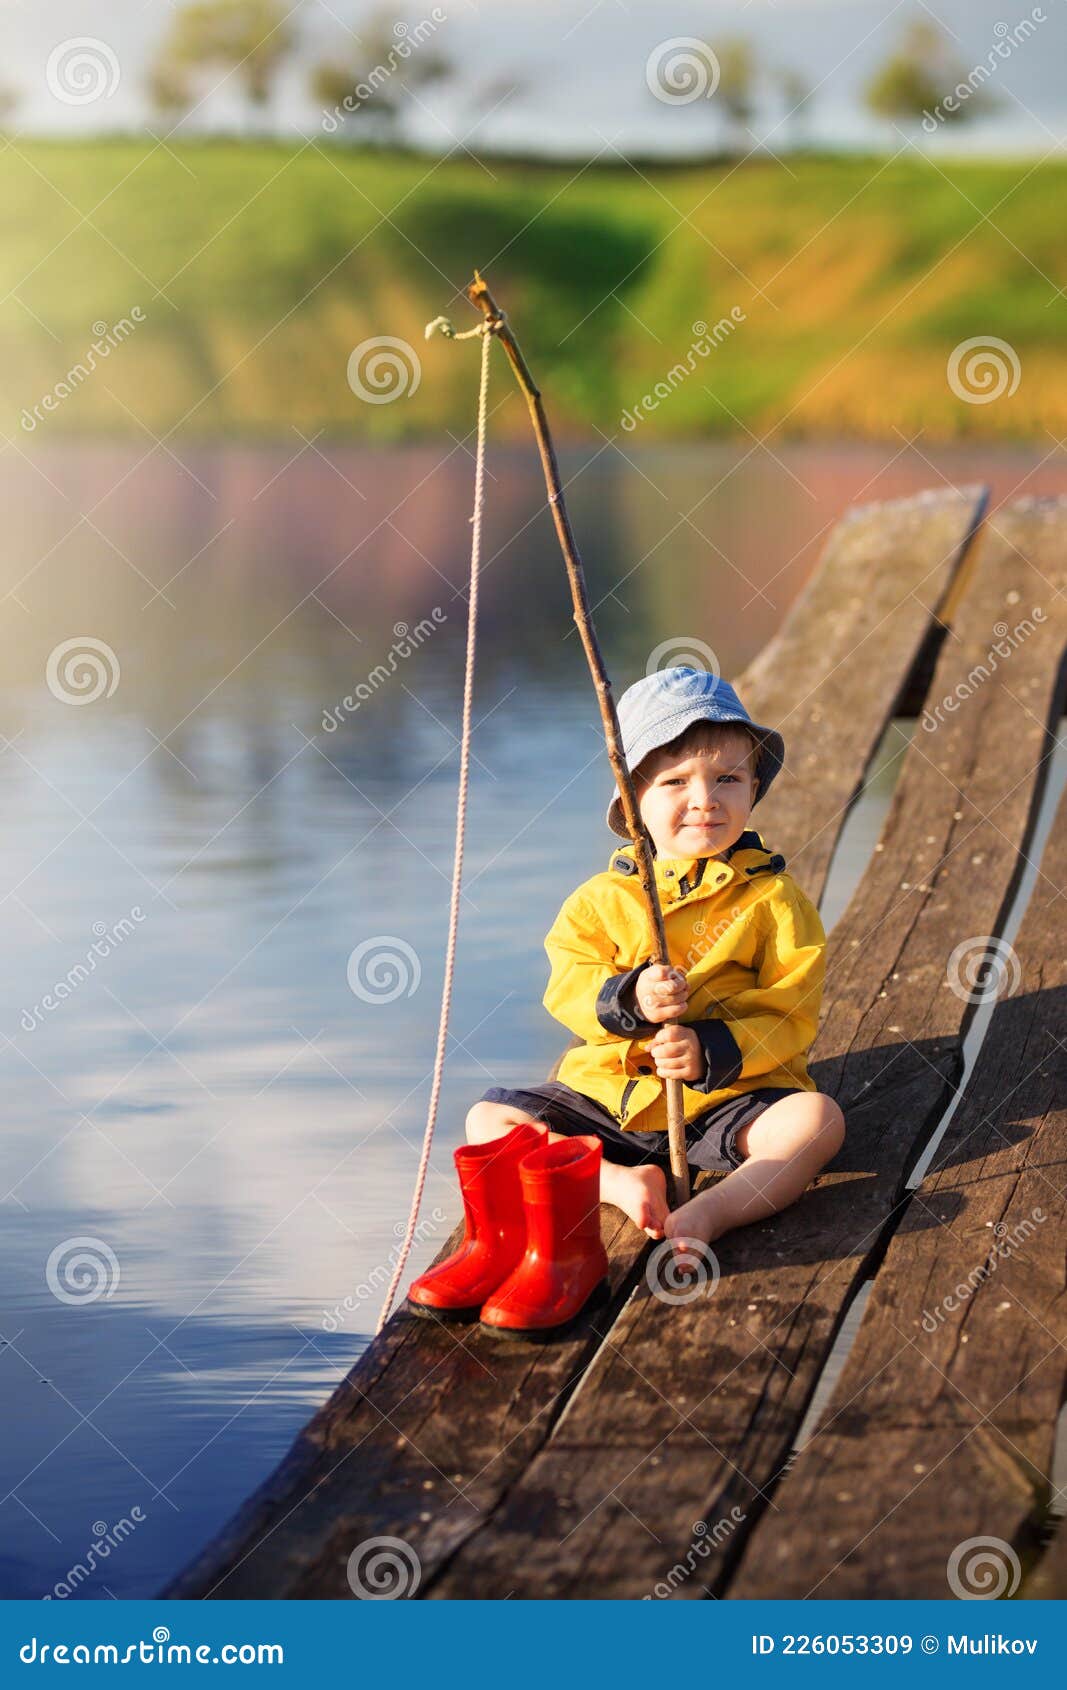 Boy on Wooden Dock with a Fishing Net Stock Image - Image of impatient,  green: 226053309